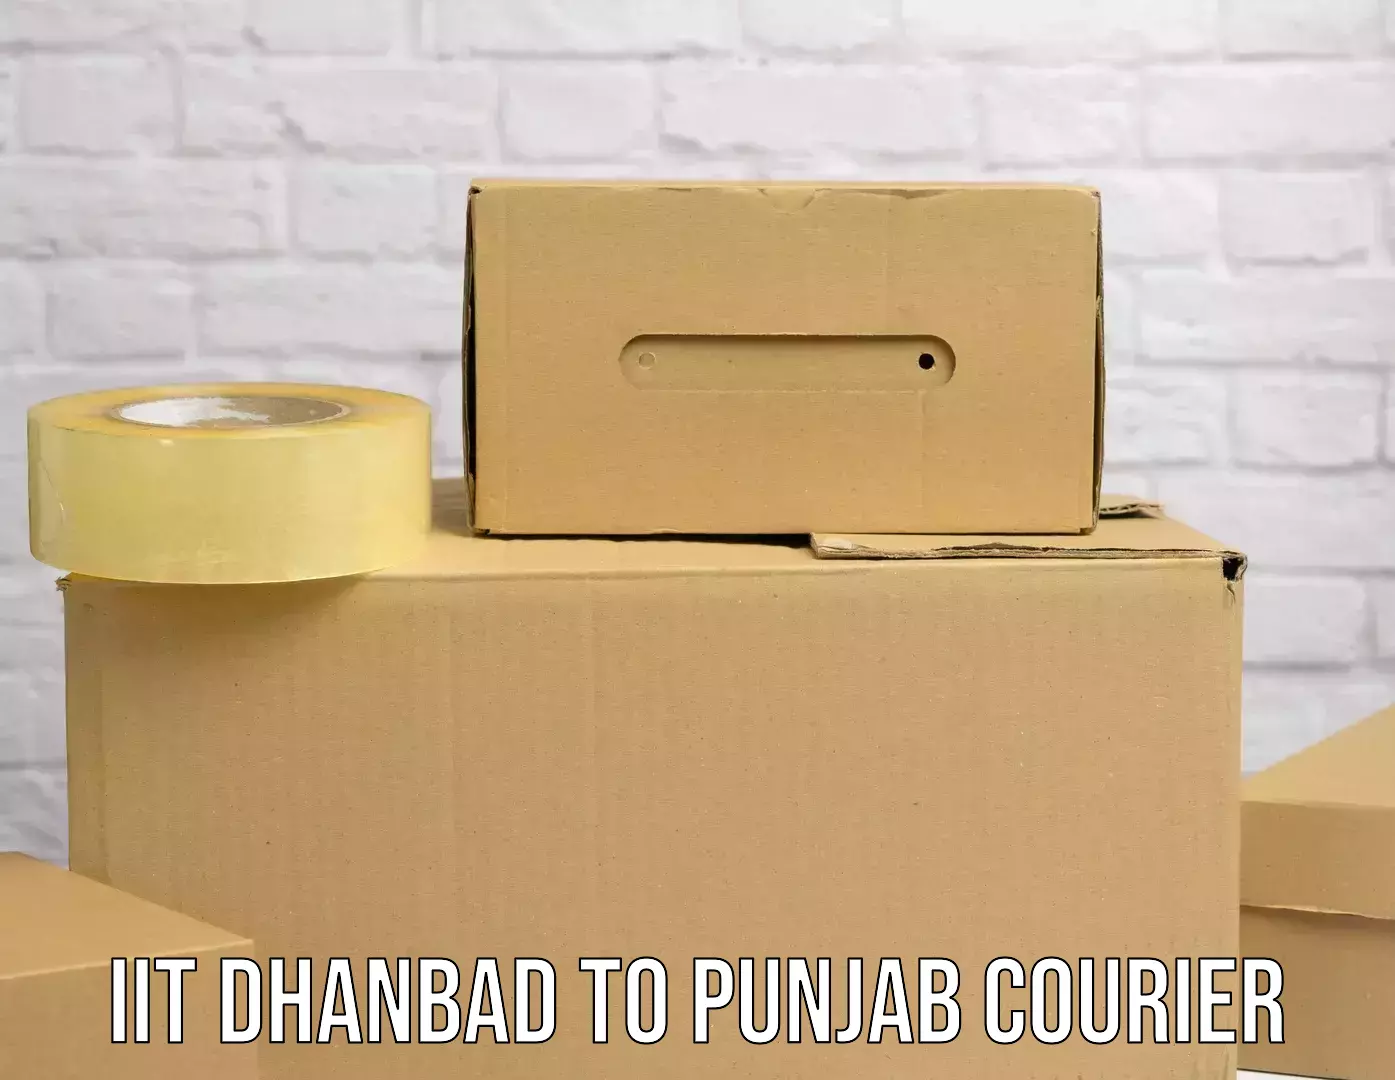 User-friendly courier app IIT Dhanbad to Batala